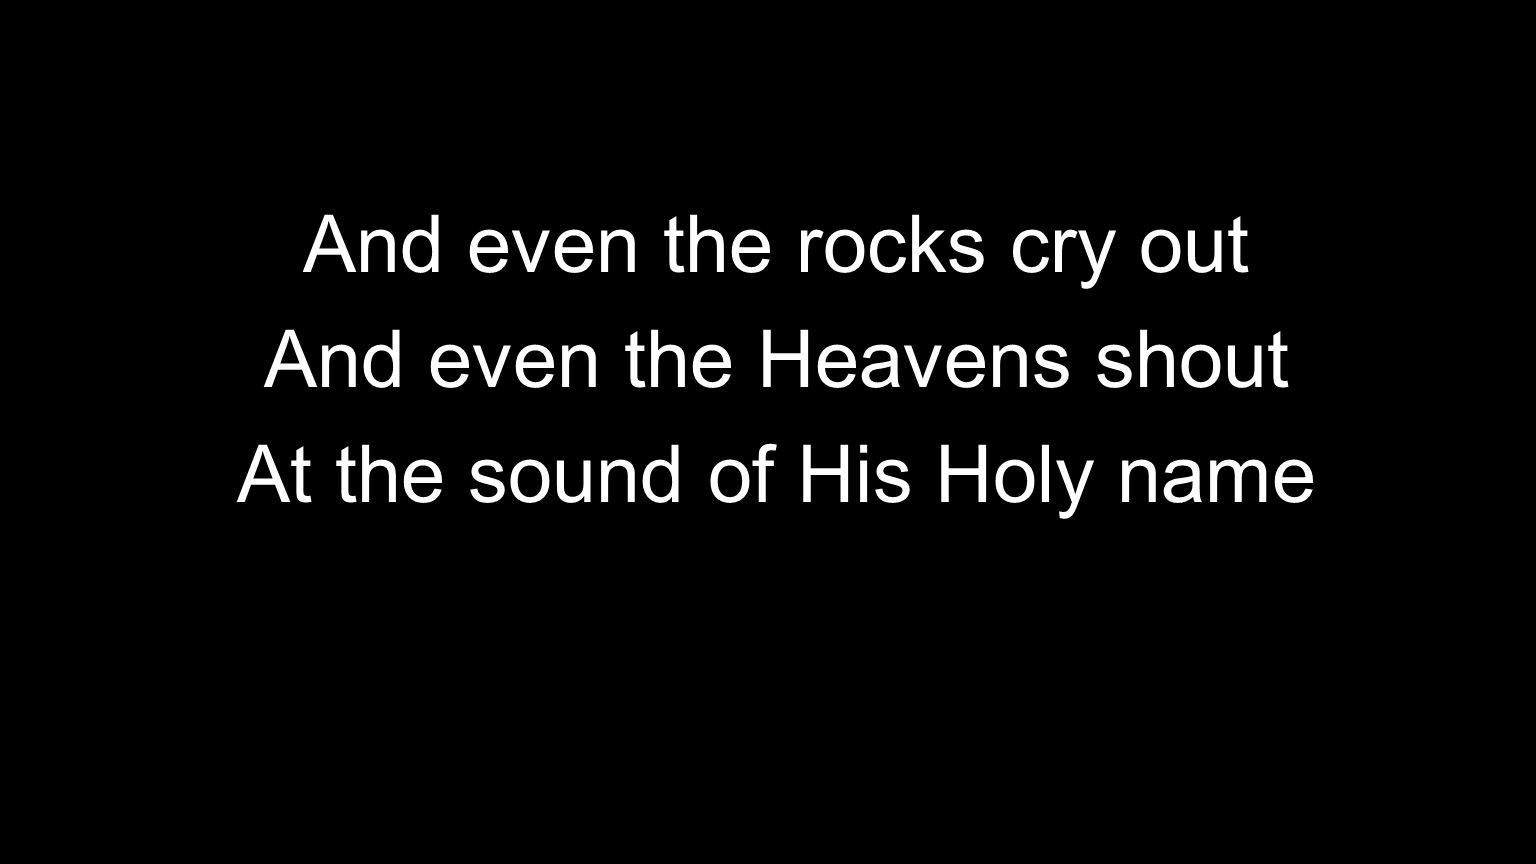 And even the rocks cry out And even the Heavens shout At the sound of His Holy name